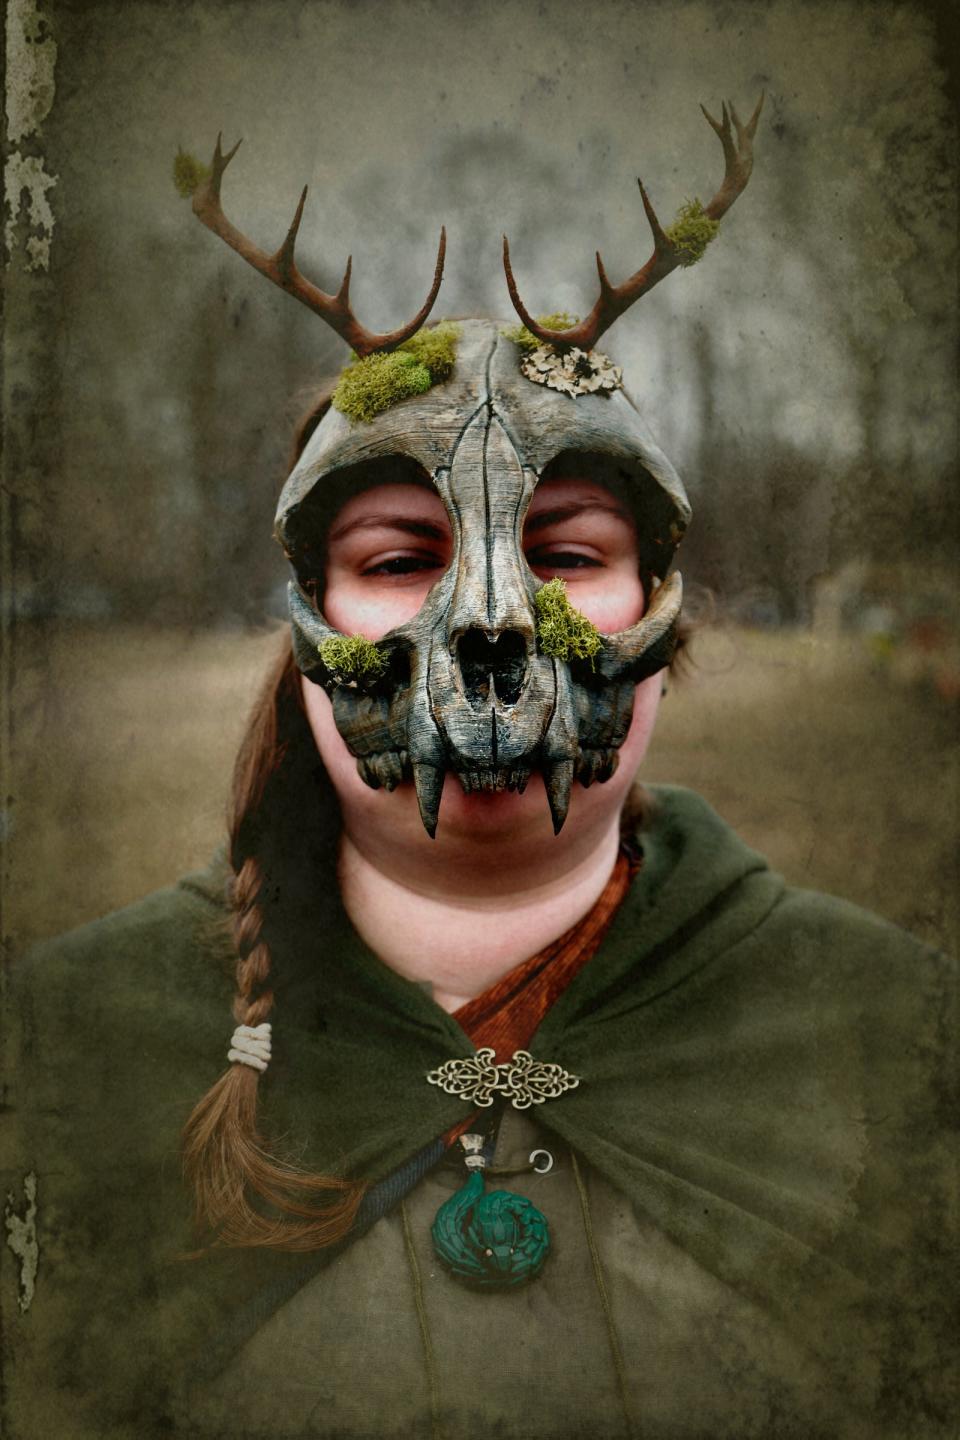 Veronica Vandenberg, 23, of Bay City, with her deer skull and moss mask that she wore during the Michigan Nordic Fire Festival at the Eaton County Fairgrounds in Charlotte on Saturday, Feb. 25, 2023.